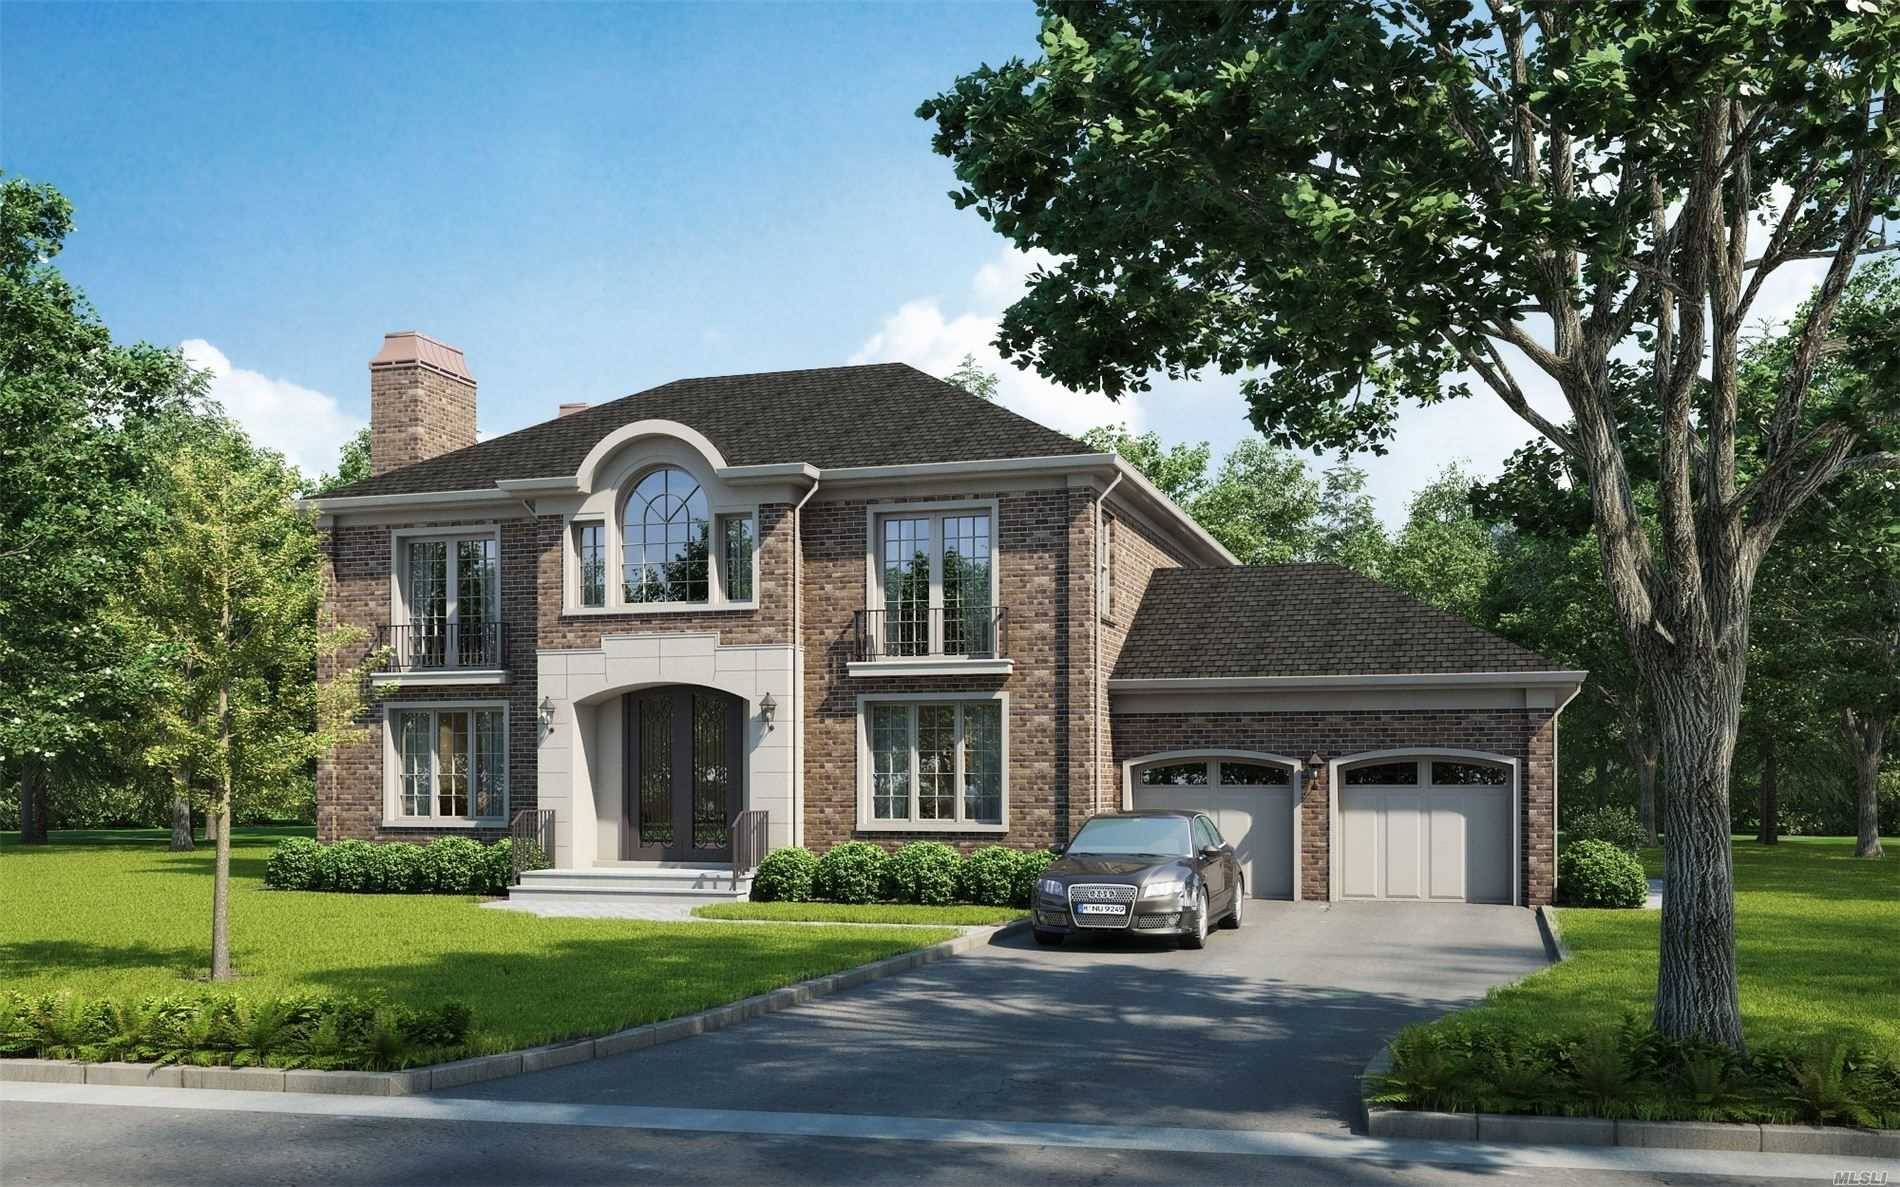 Newly Constructed Brick CH Colonial offering 4000 sq ft of luxury on quaint cul de sac in Strathmore Village.